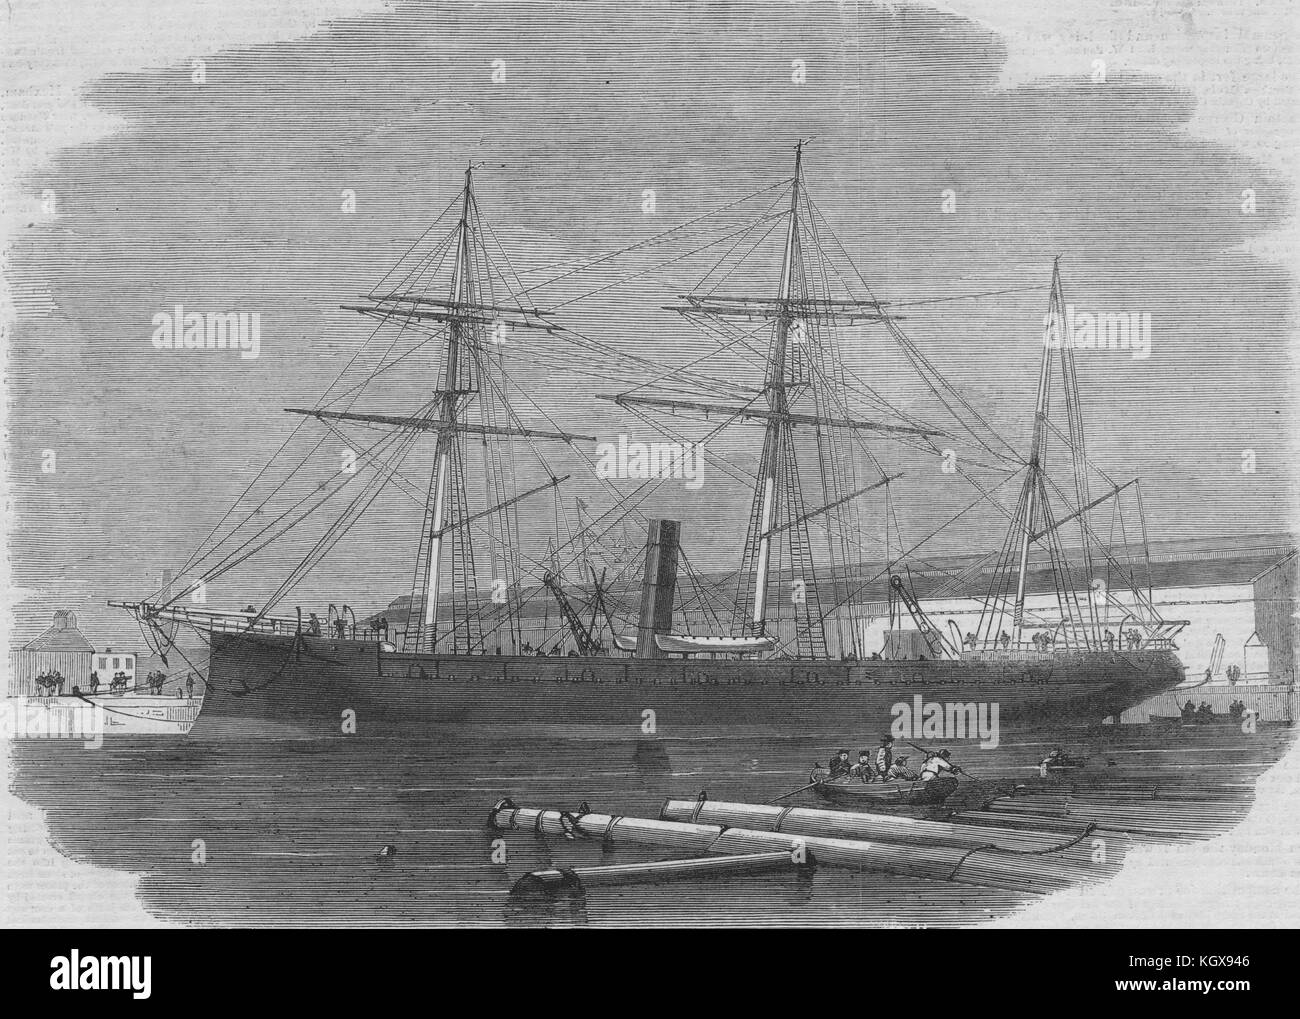 Steam rams under construction in Laird's shipbuilding yard, Birkenhead 1863. The Illustrated London News Stock Photo